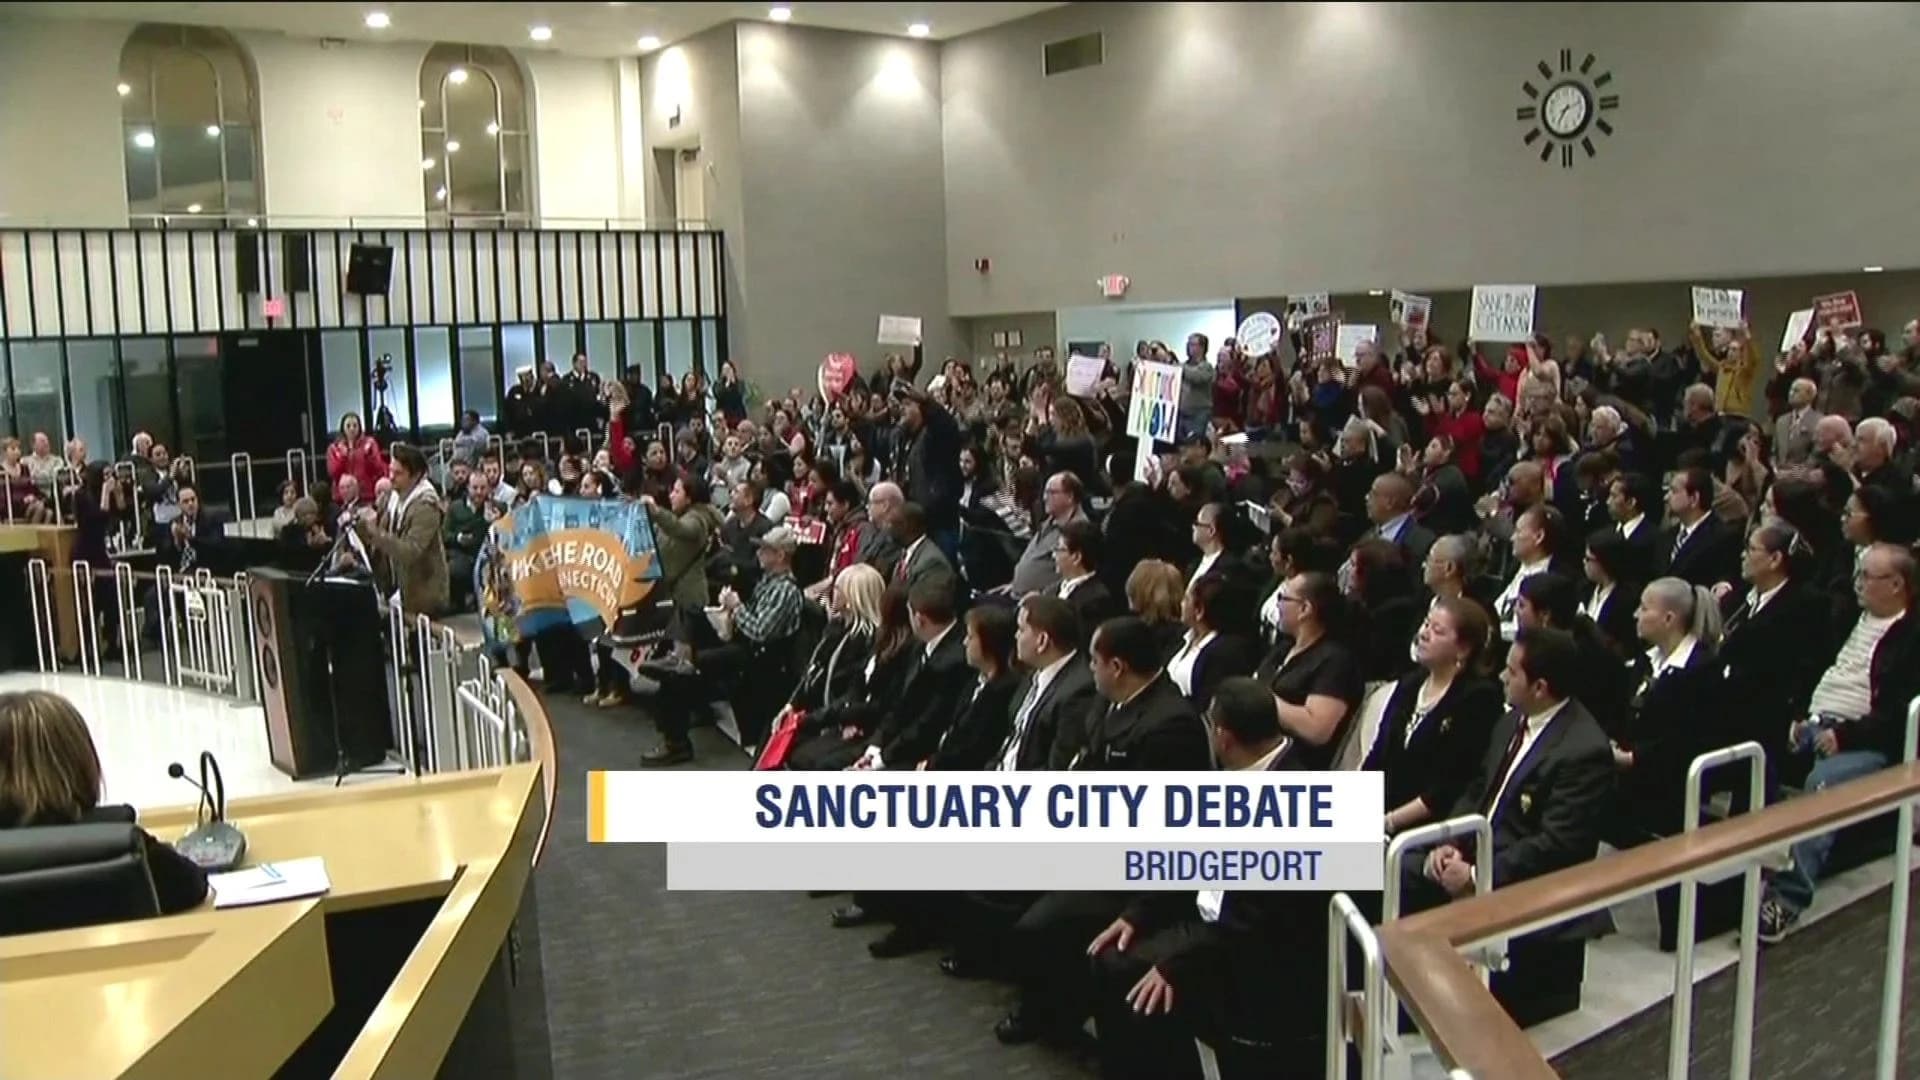 Bridgeport looks to offer more protections to undocumented immigrants